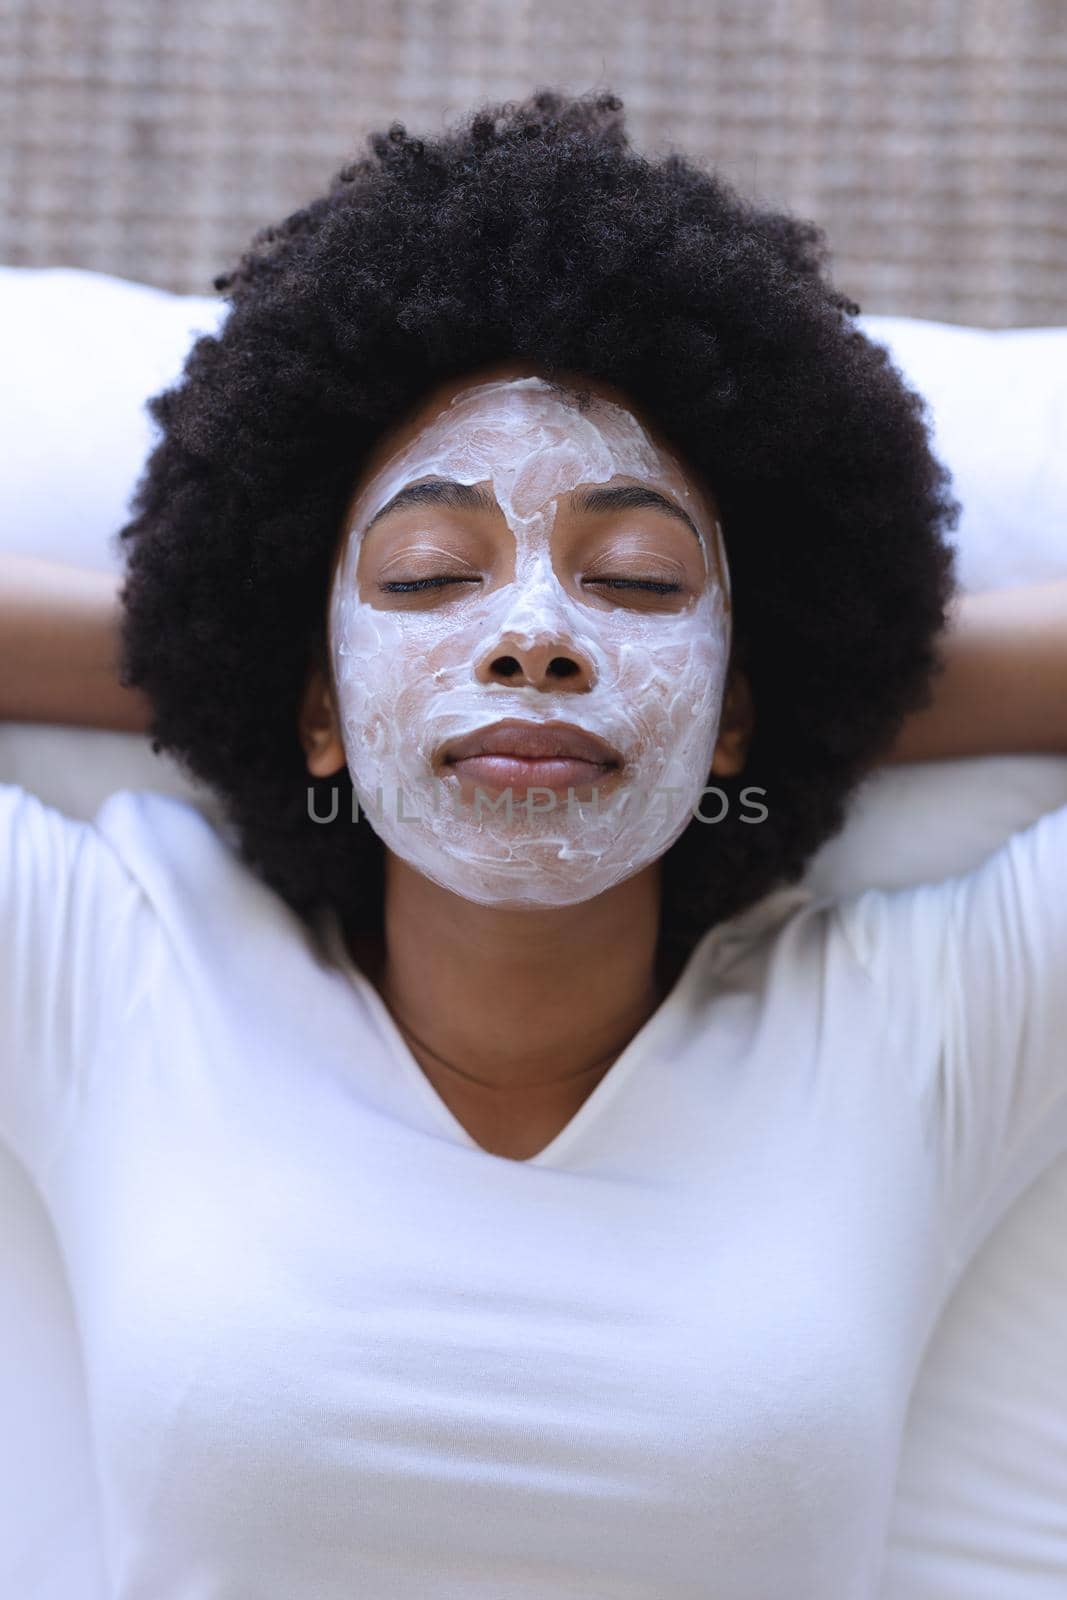 African american woman lying in bed wearing beauty mask. staying at home in isolation during quarantine lockdown.